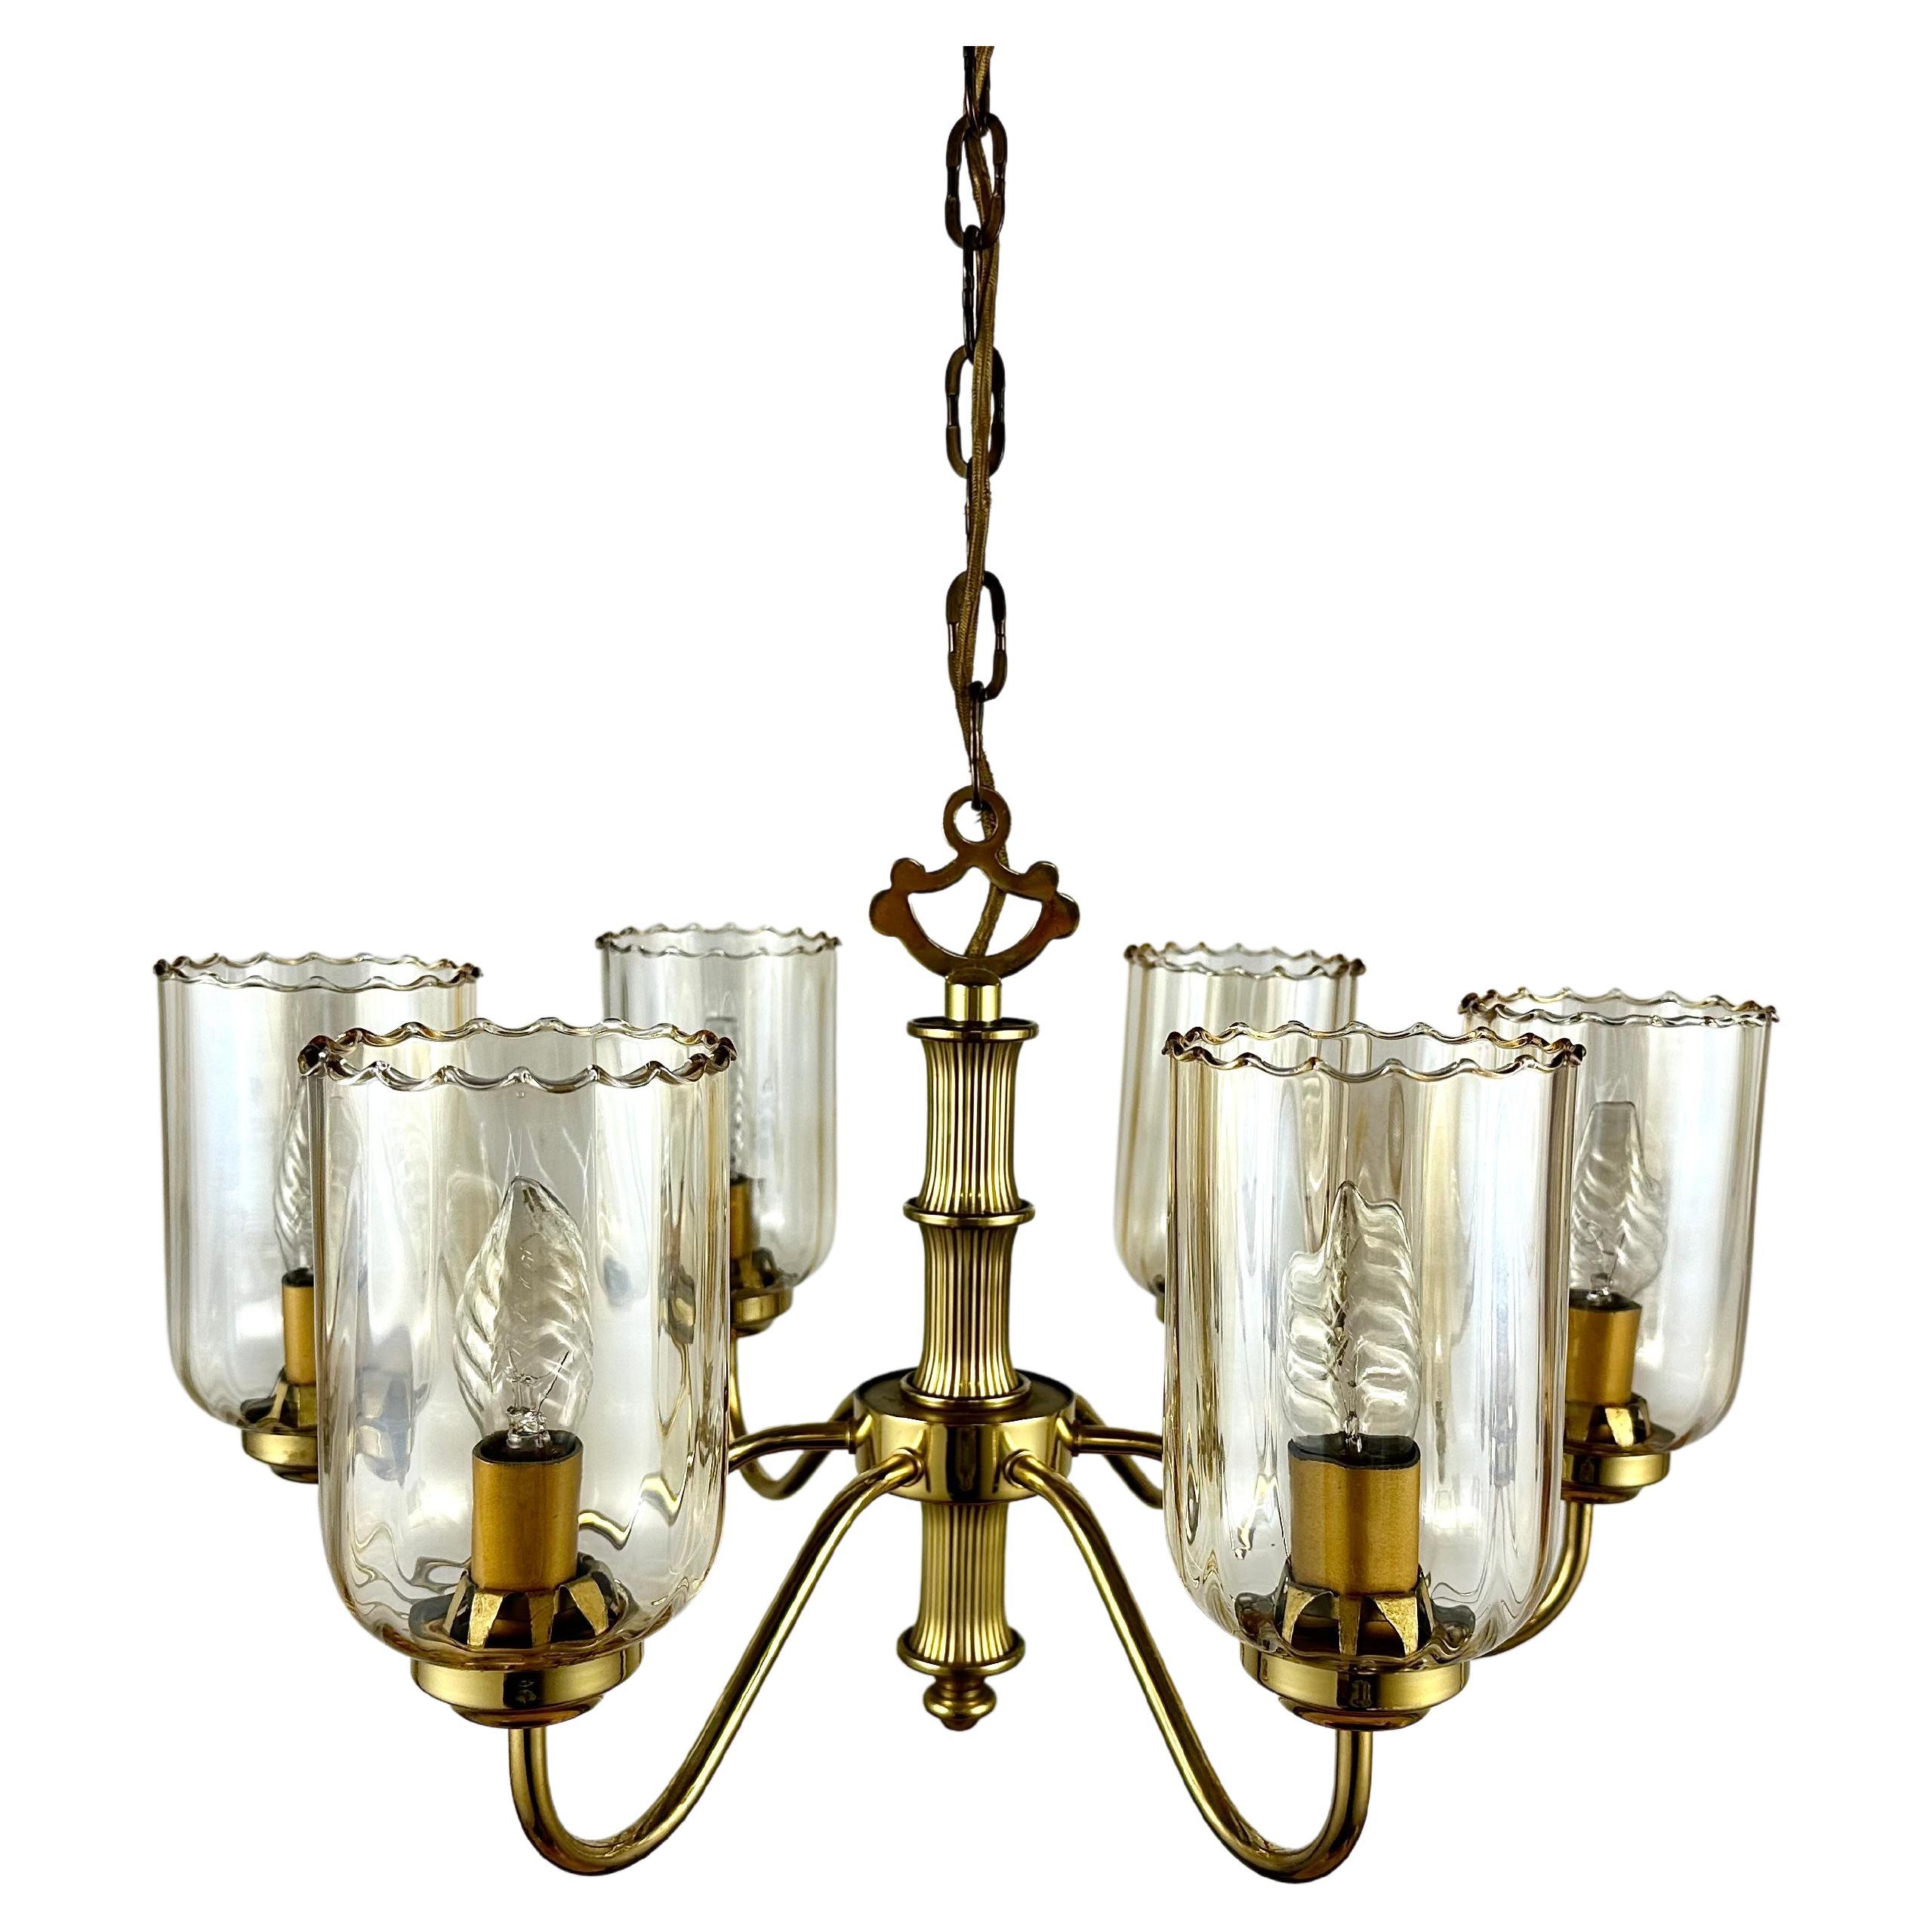 Vintage Ceiling Chandelier With Six Glass Lampshades, Germany, 1970s For Sale